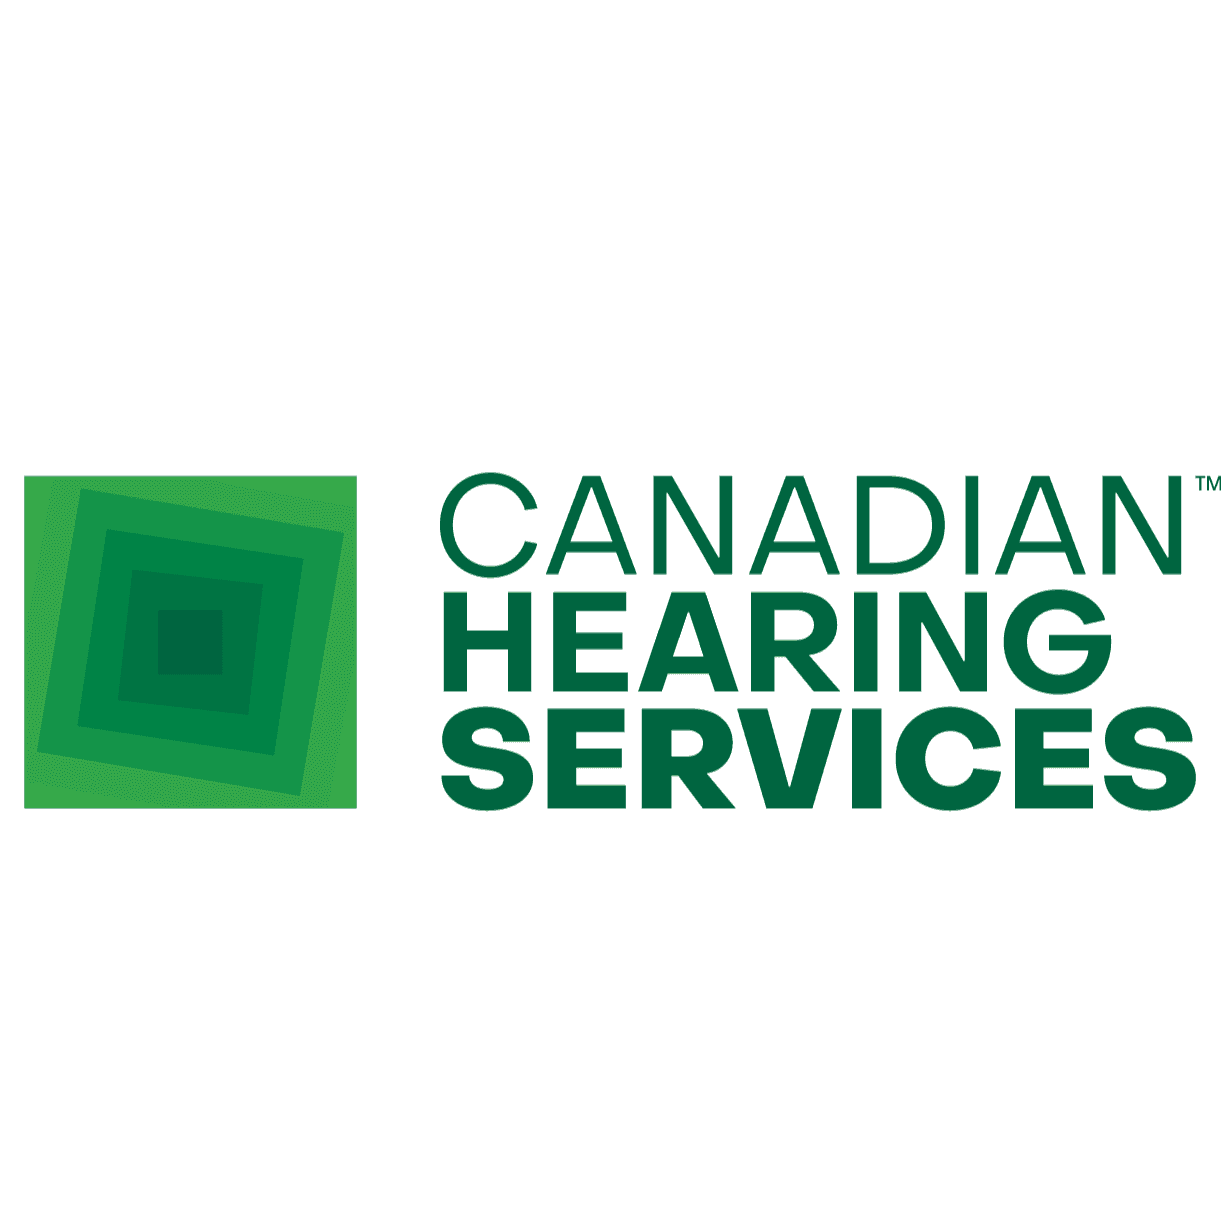 <p><span class="ql-font-openSans" style="color: rgb(255, 255, 255);">Canadian Hearing Services</span></p> logo